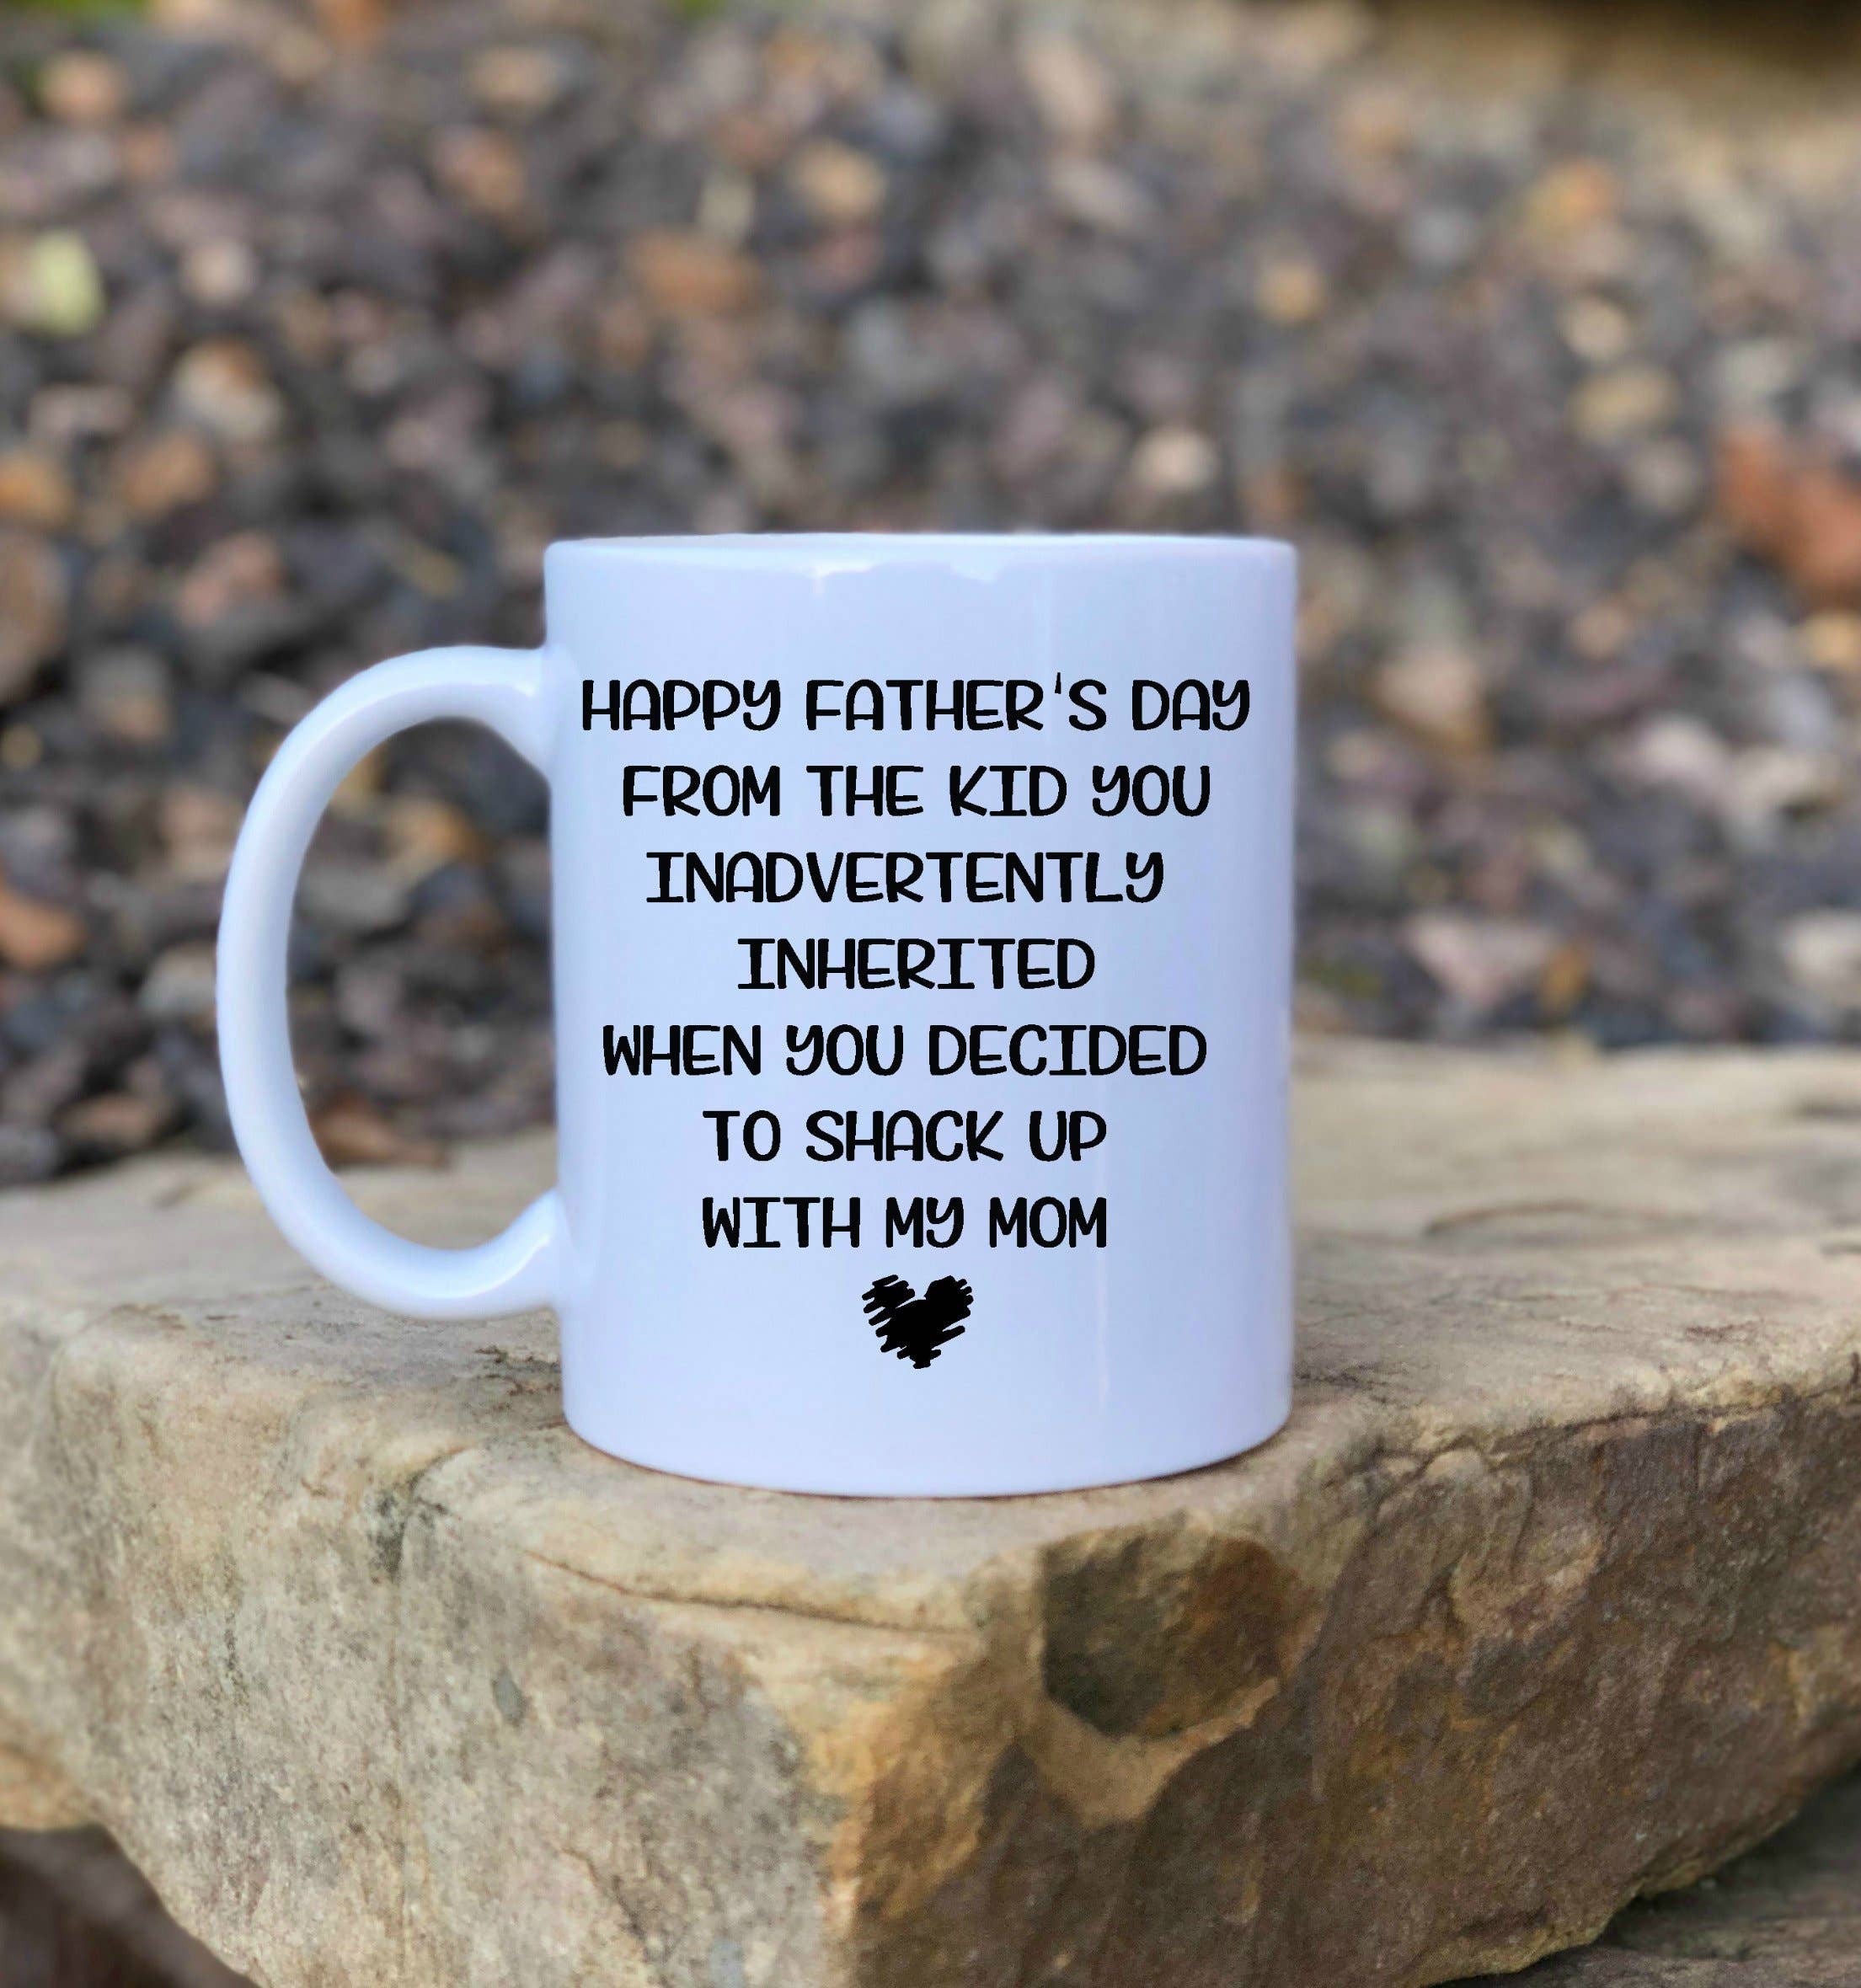 Love You Dad from the Kid Inadvertently Inherited When You Decided to Shack Up with My Mom Ceramic Coffee Mug Funny Father's Day Present for Daddy Birthday Present for Papa Tea Cup 11 oz White Black 